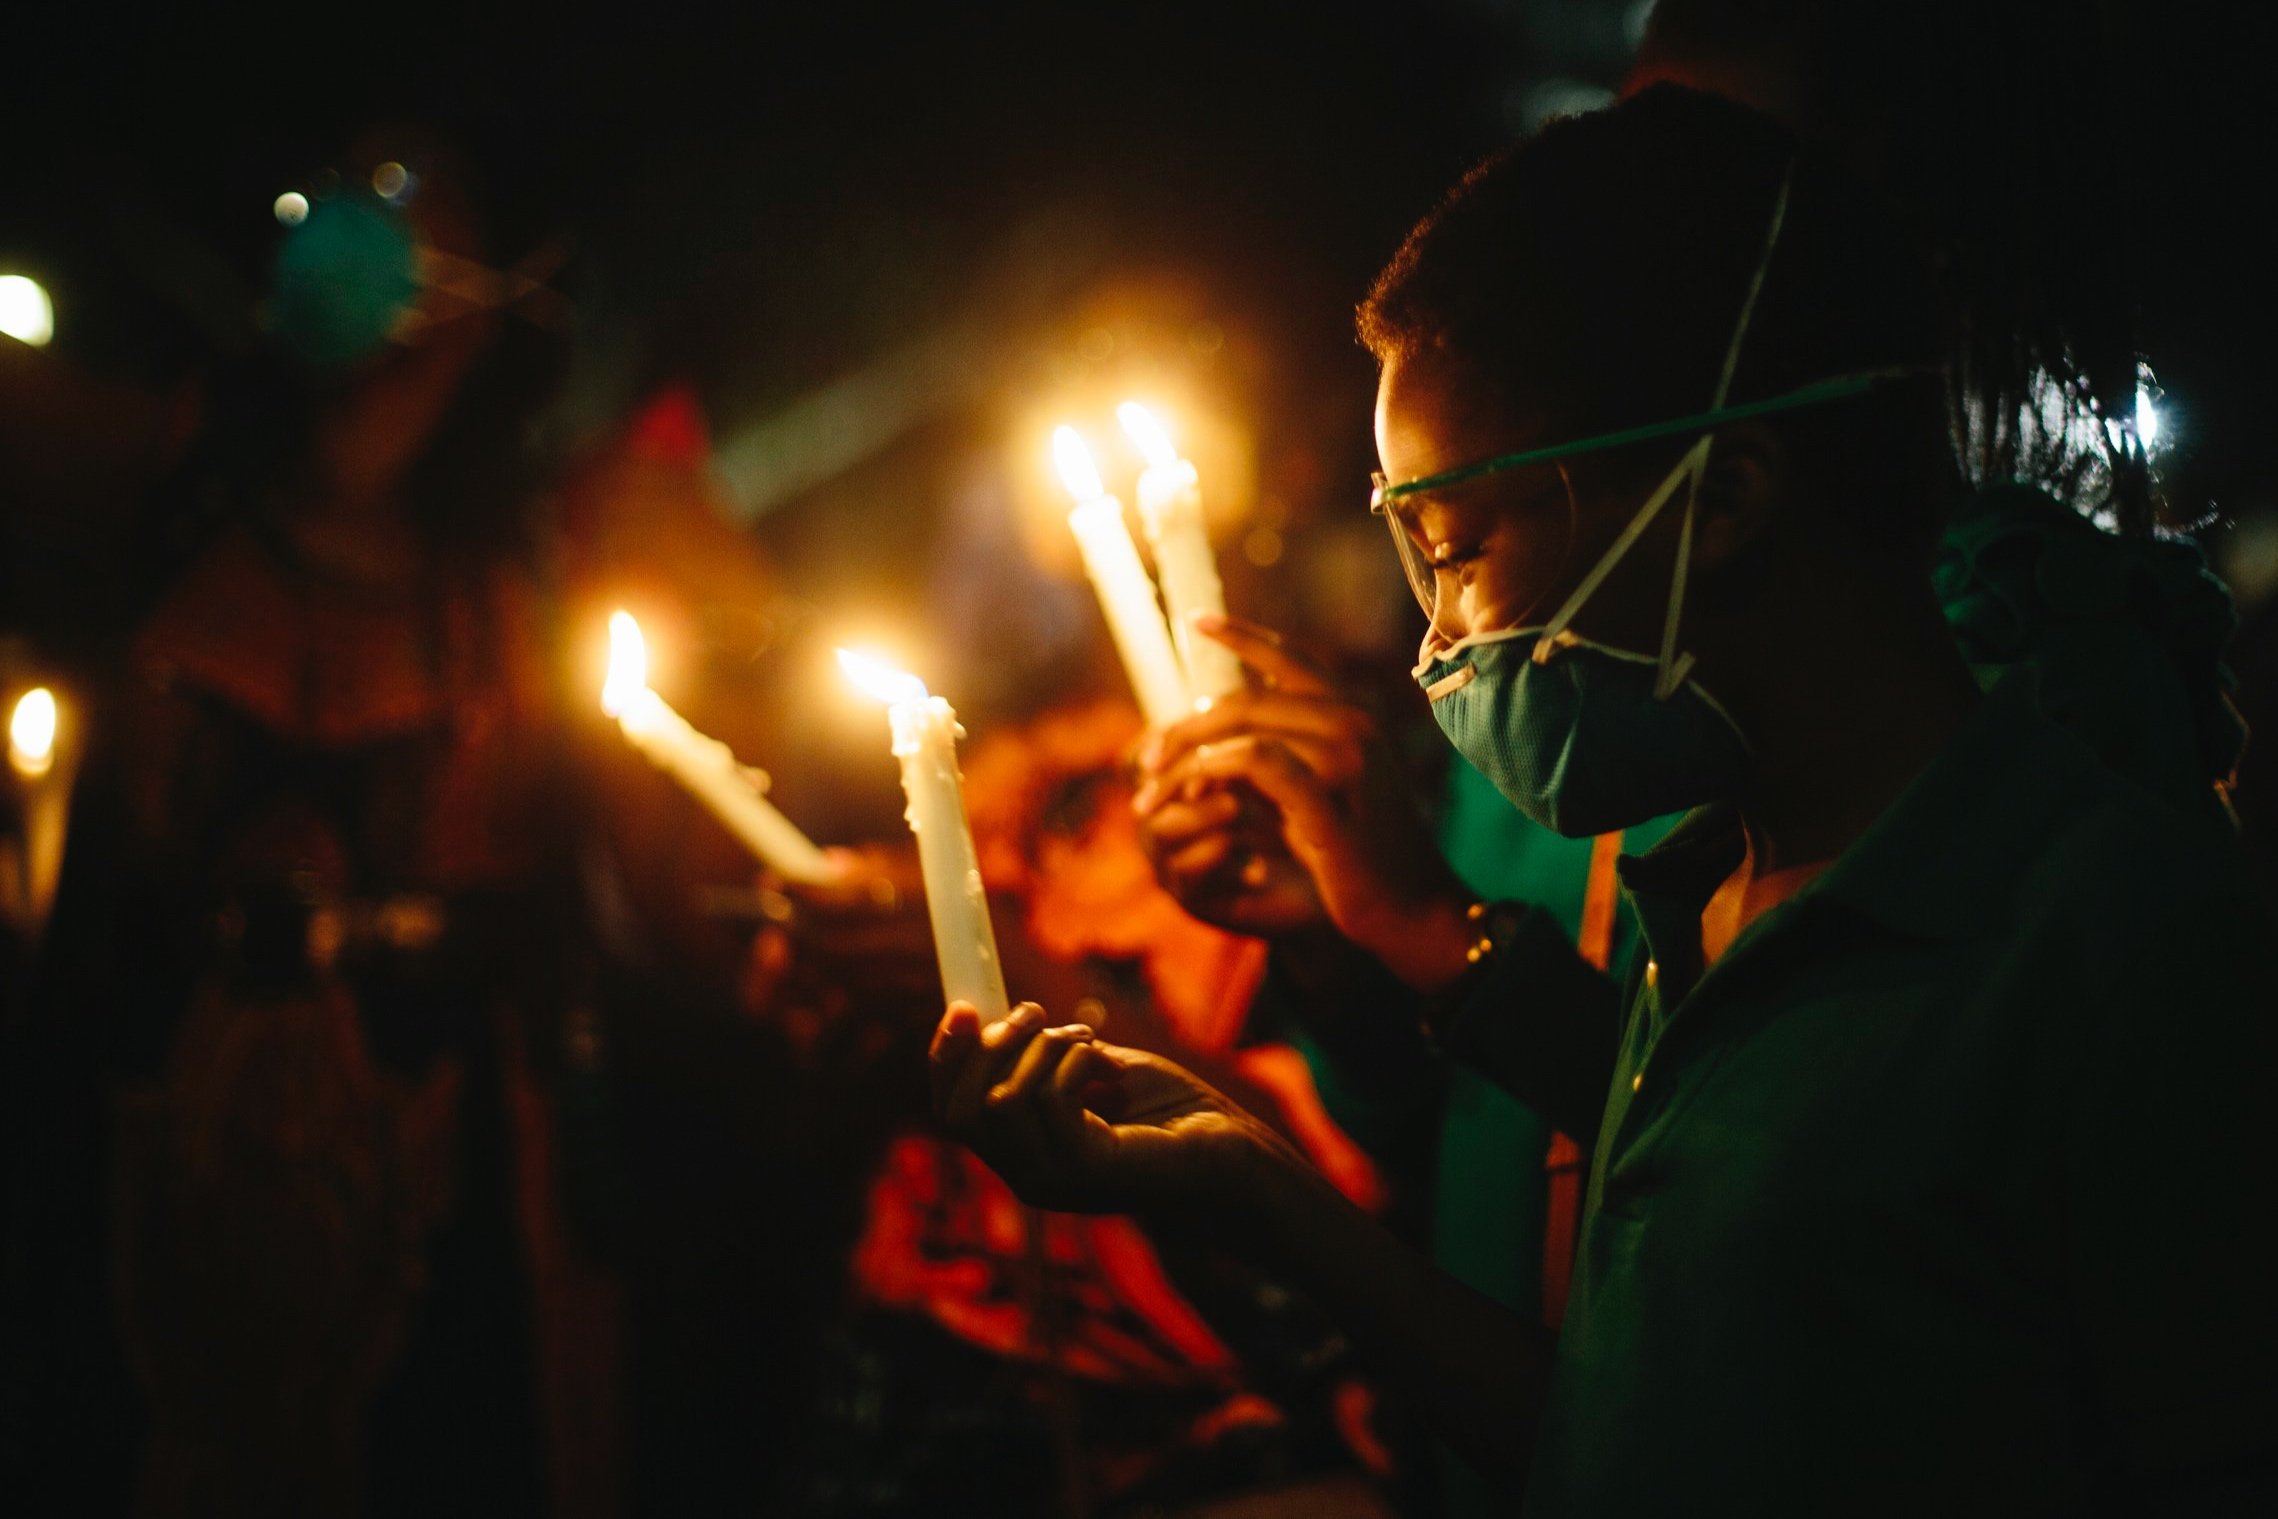  Children hold candles at a vigil to end the killings in Nigeria. 2020. Los Angeles, CA.  